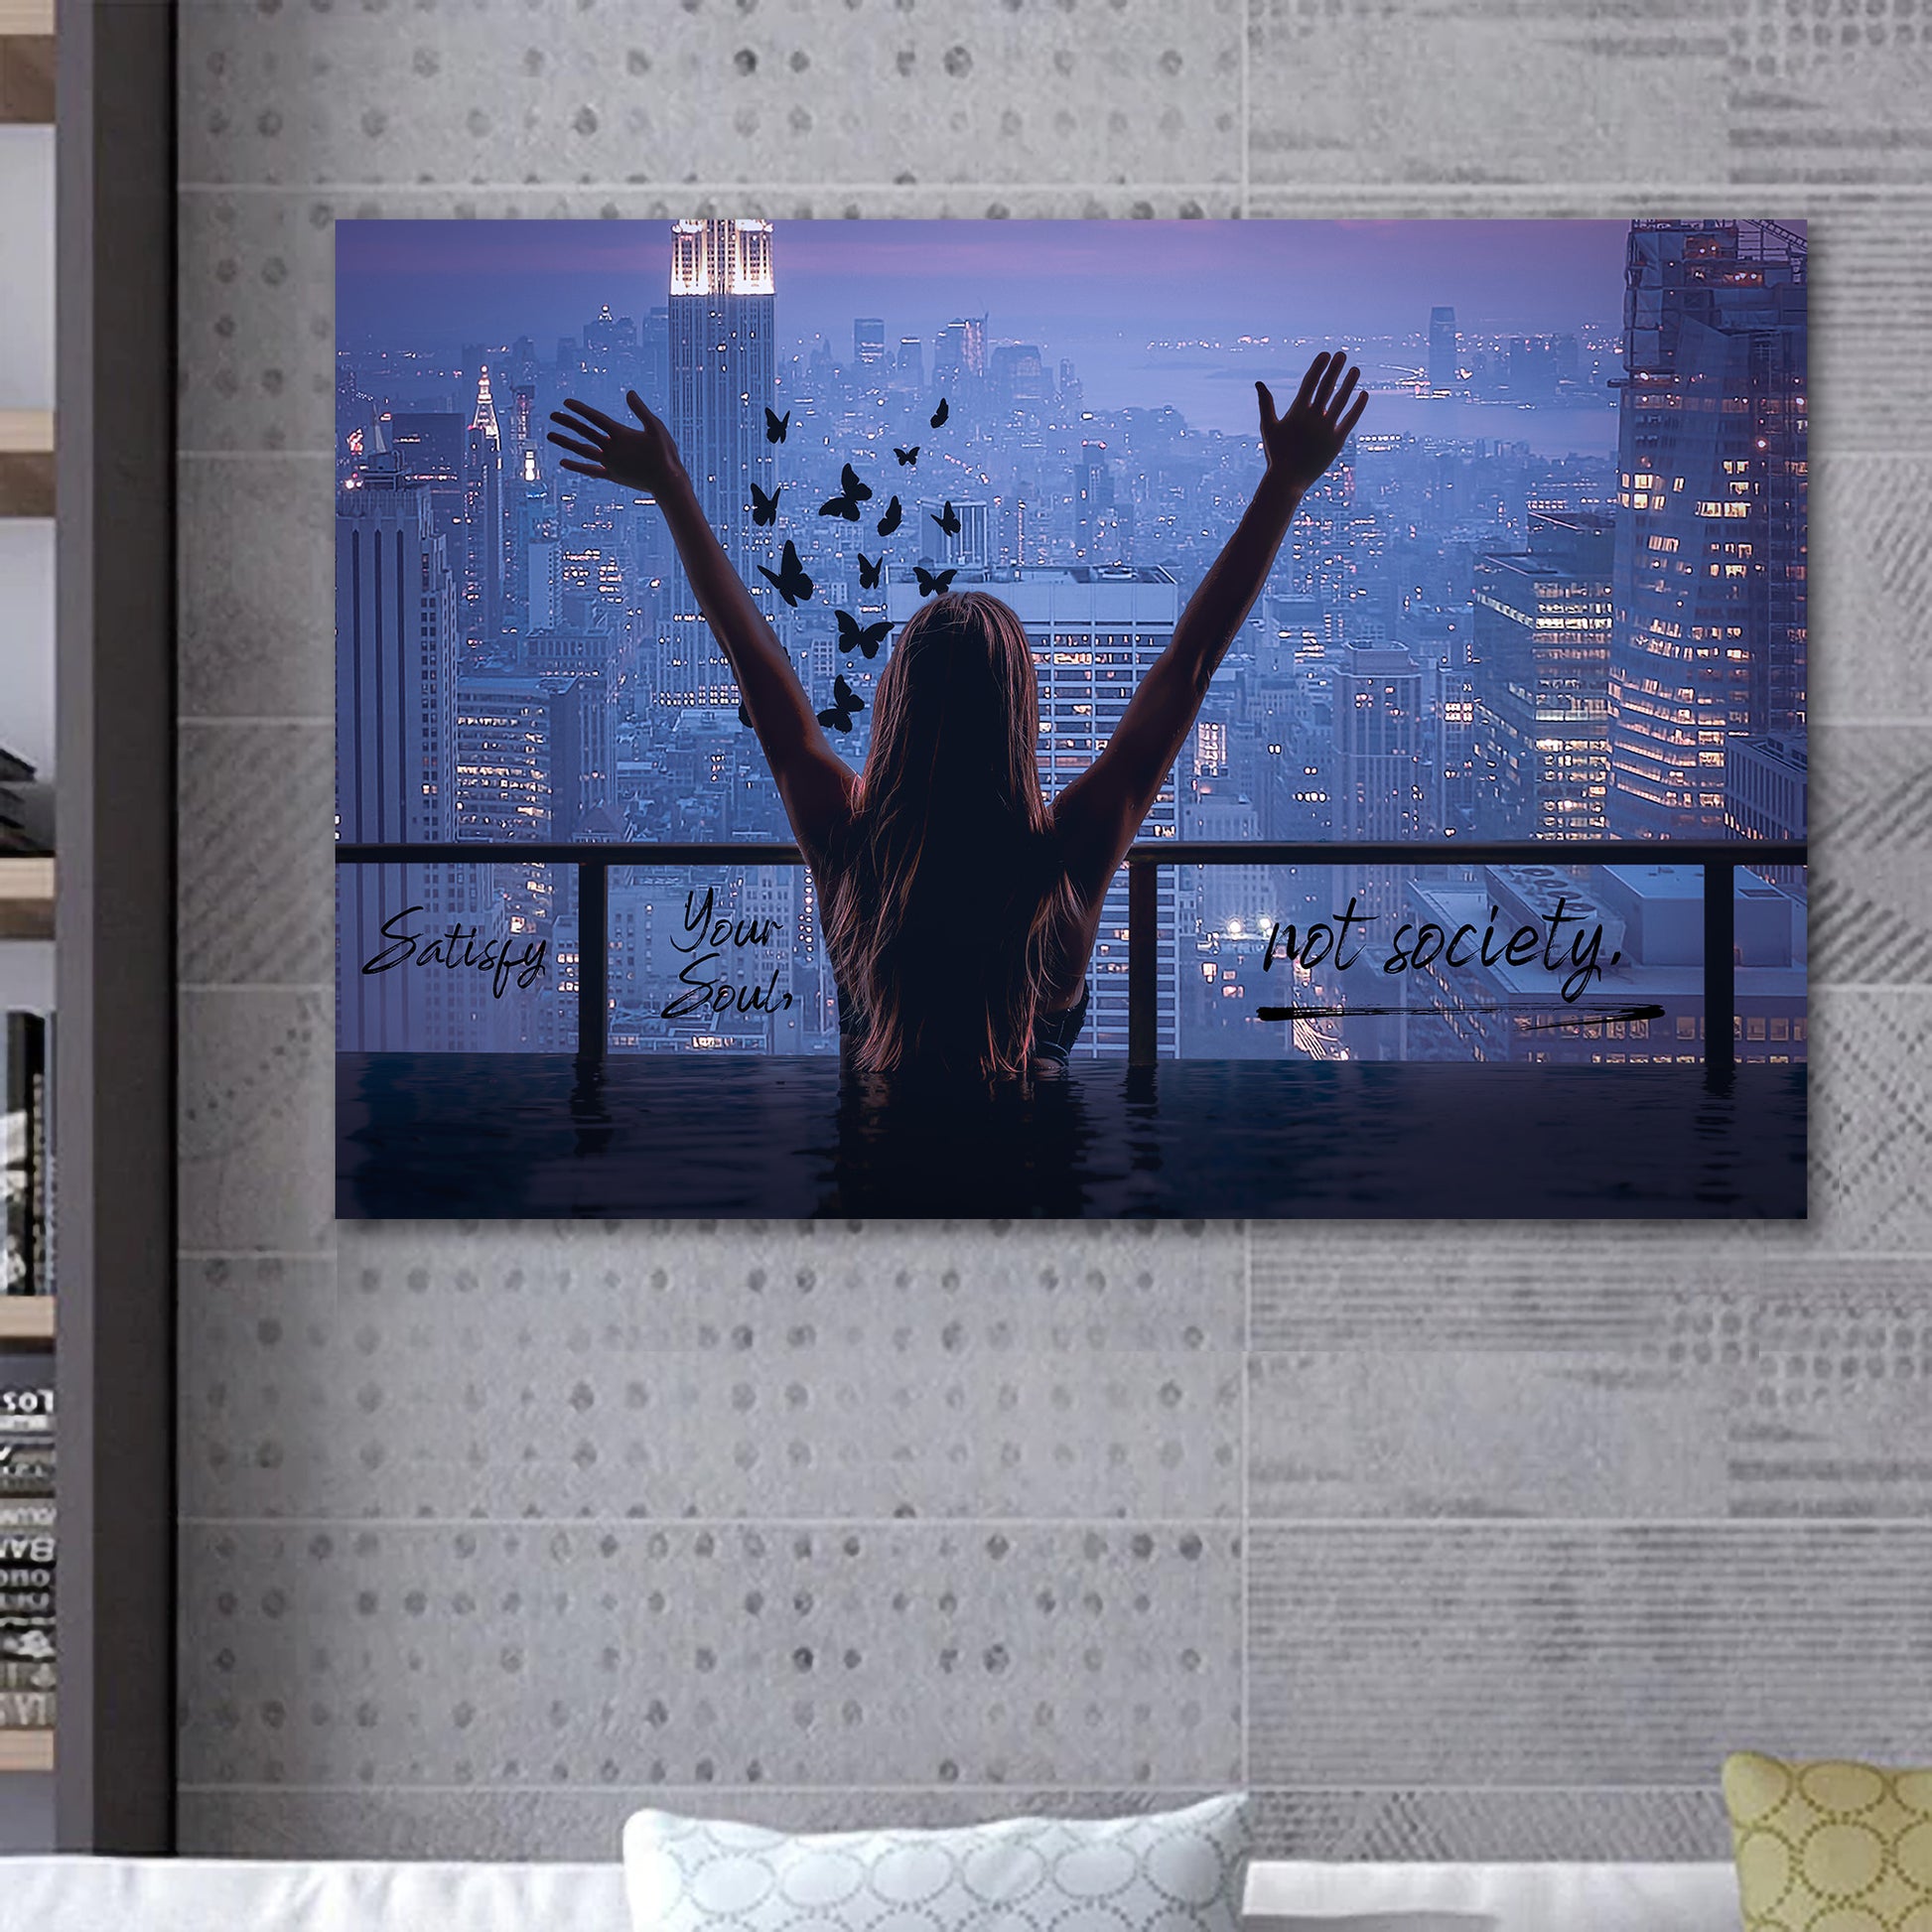 Satisfy Your Soul - Shop exclusive inspirational wall art, motivational wall art, office art, home office wall decor quotes, wall art quotes, office artwork, motivational art only at ImpaktMaker in canvas and acrylic formats.